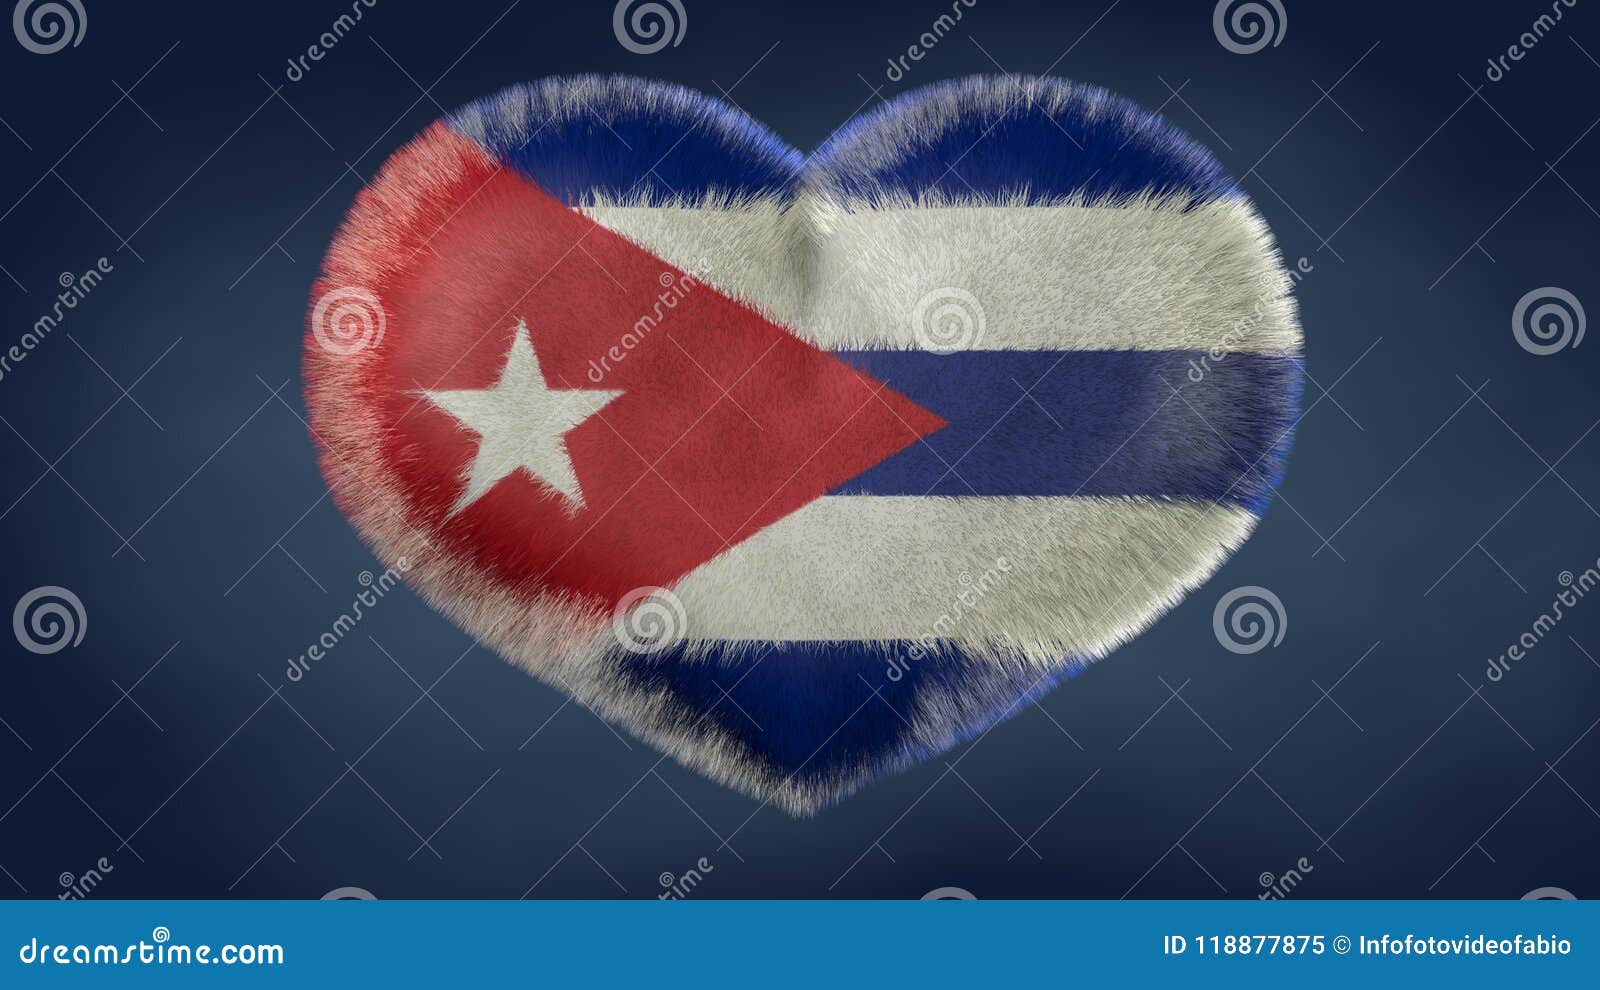 heart of the flag of cuba.